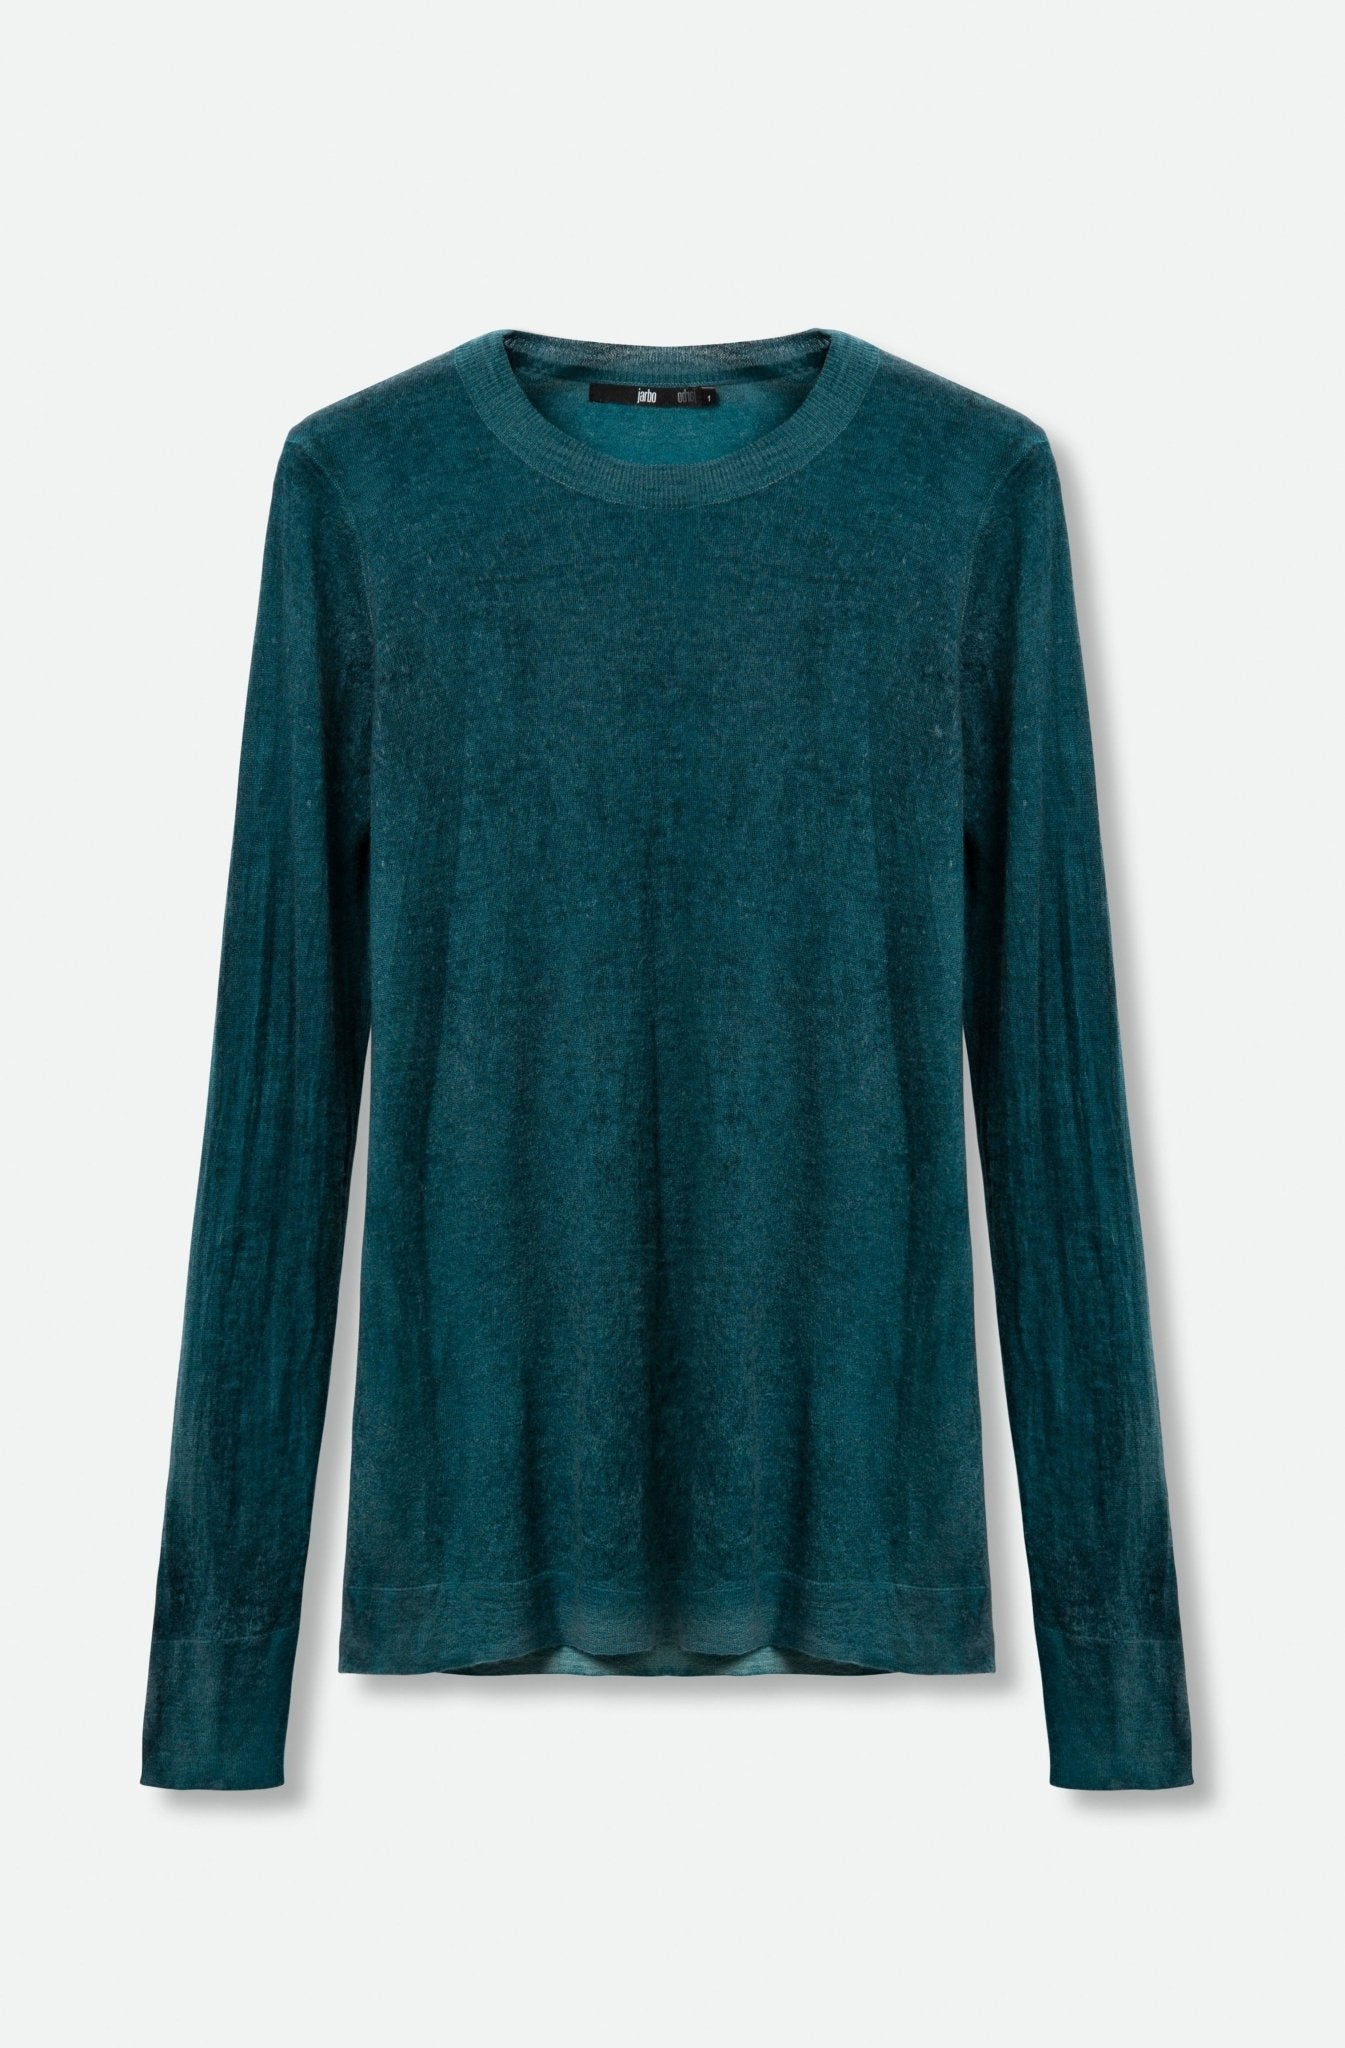 SHANA LIGHTWEIGHT CREWNECK SWEATER IN HAND-DYED CASHMERE - Jarbo